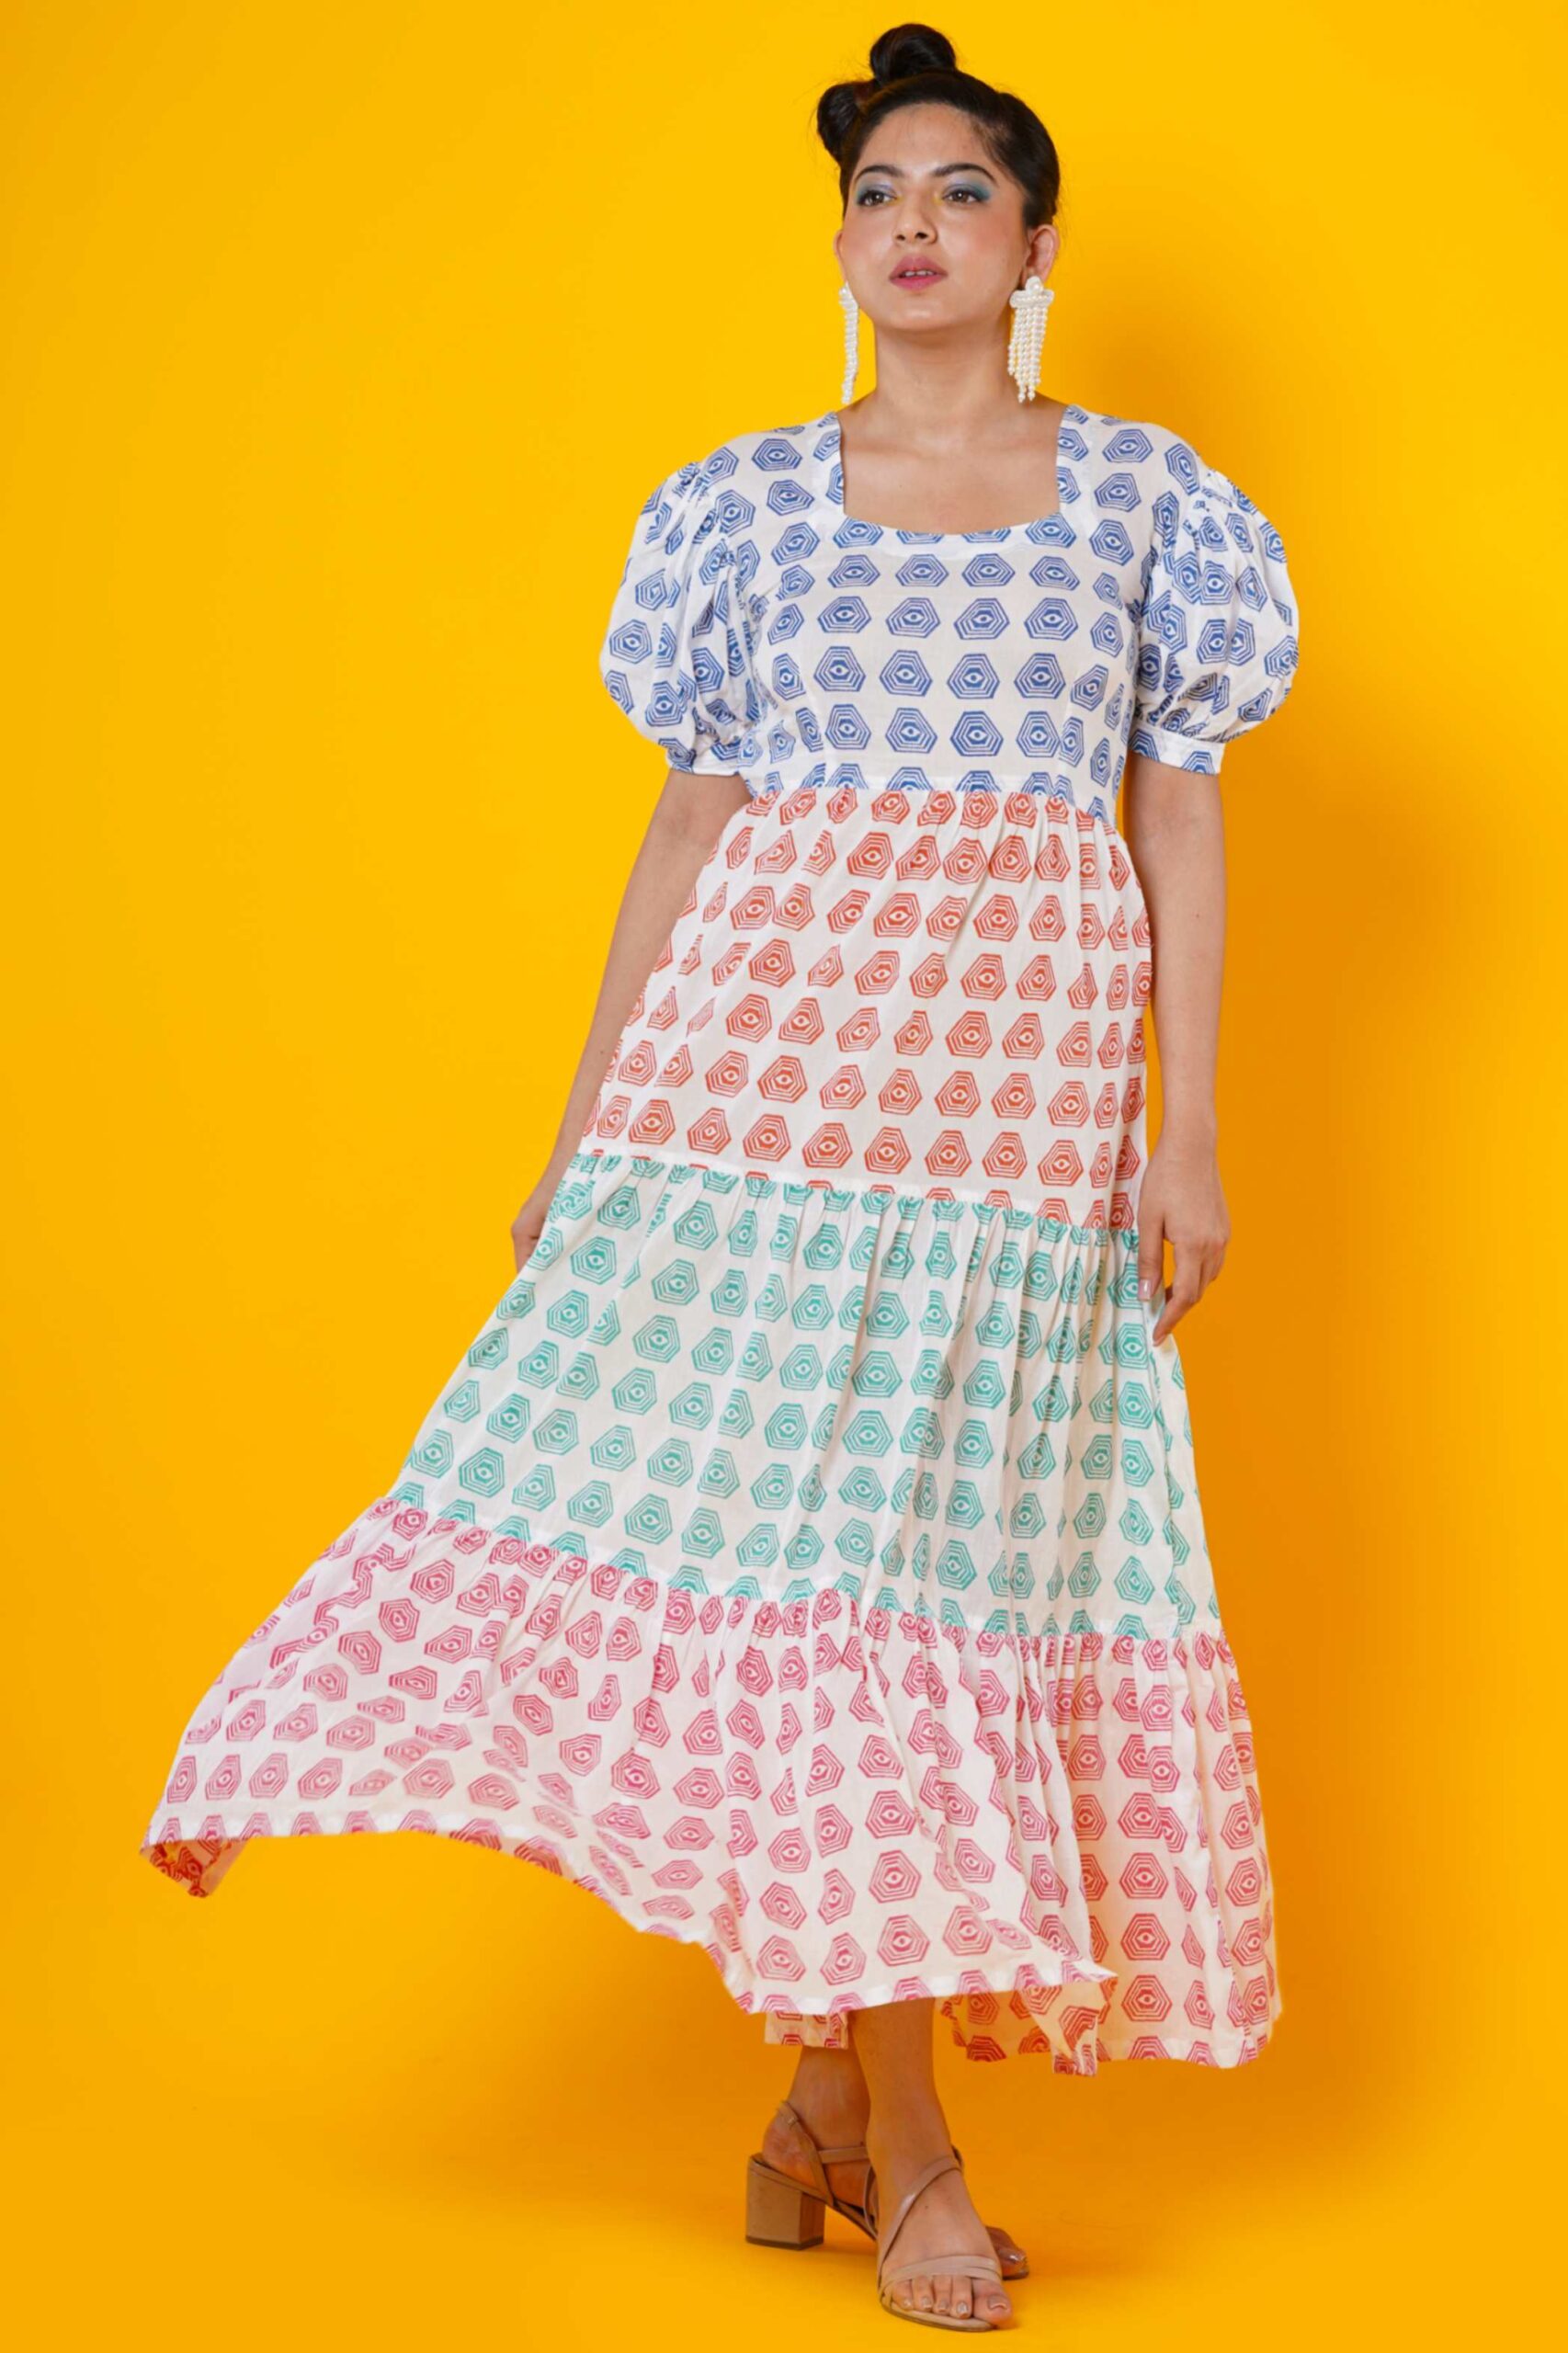 “Women Block Printed  Cotton Midi Dress with Puff Sleeves”	“Women Block Printed  Cotton Midi Dress with Puff Sleeves”